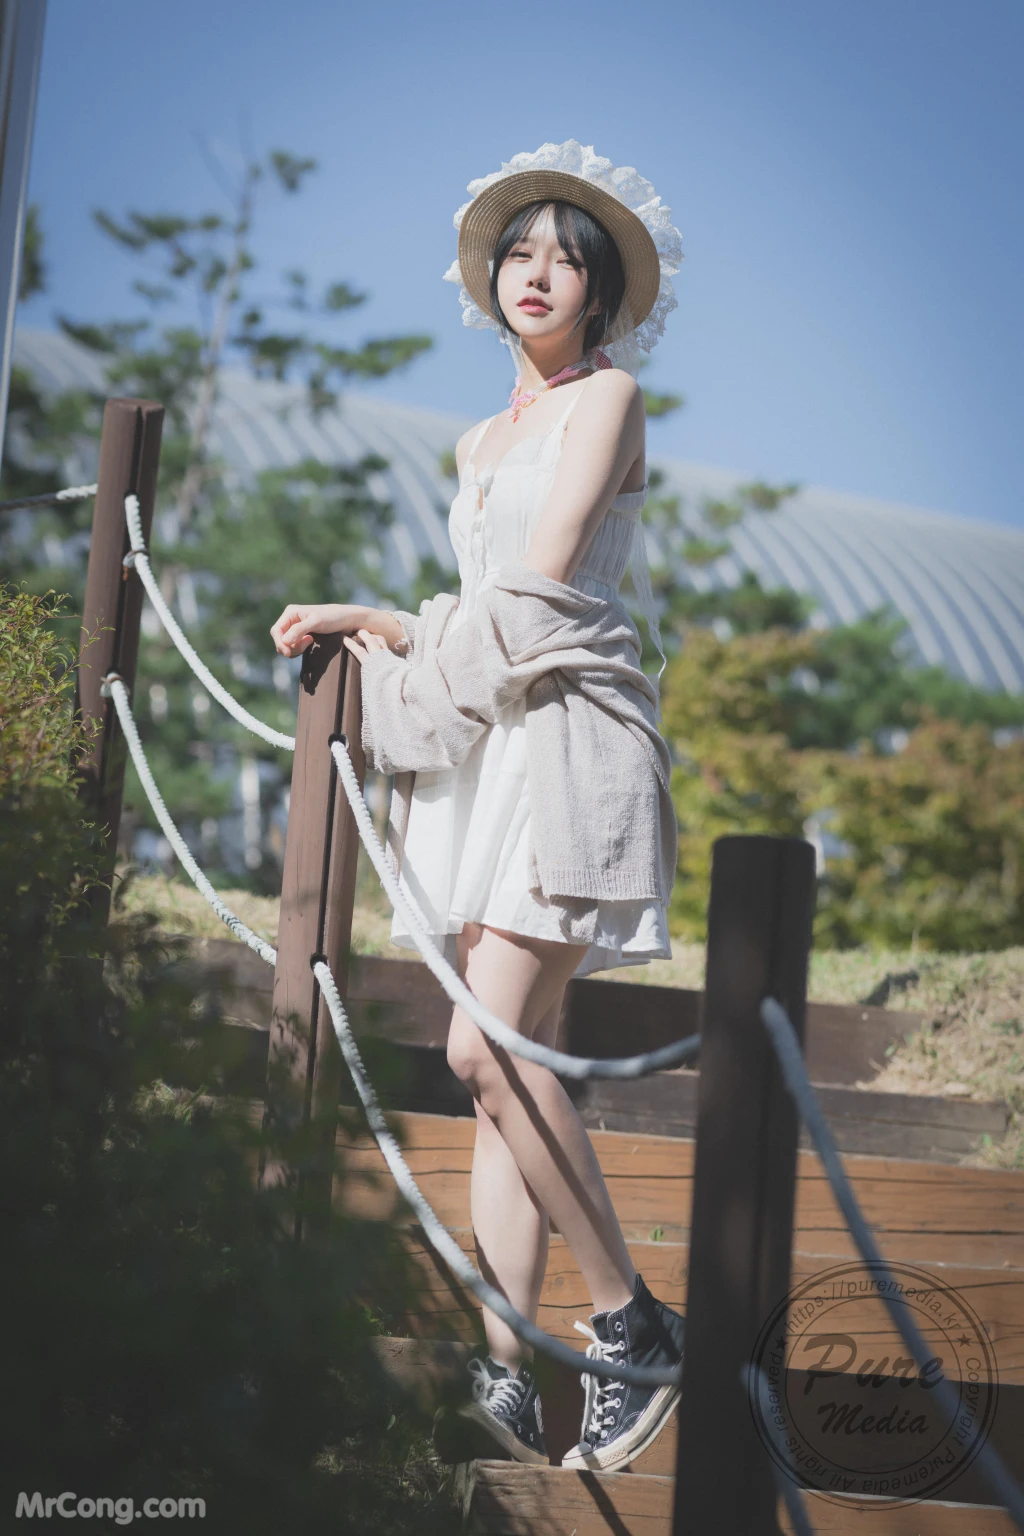 Pure Media Vol.208: Romi (로미) – Hot Date with His Girl (116 photos)